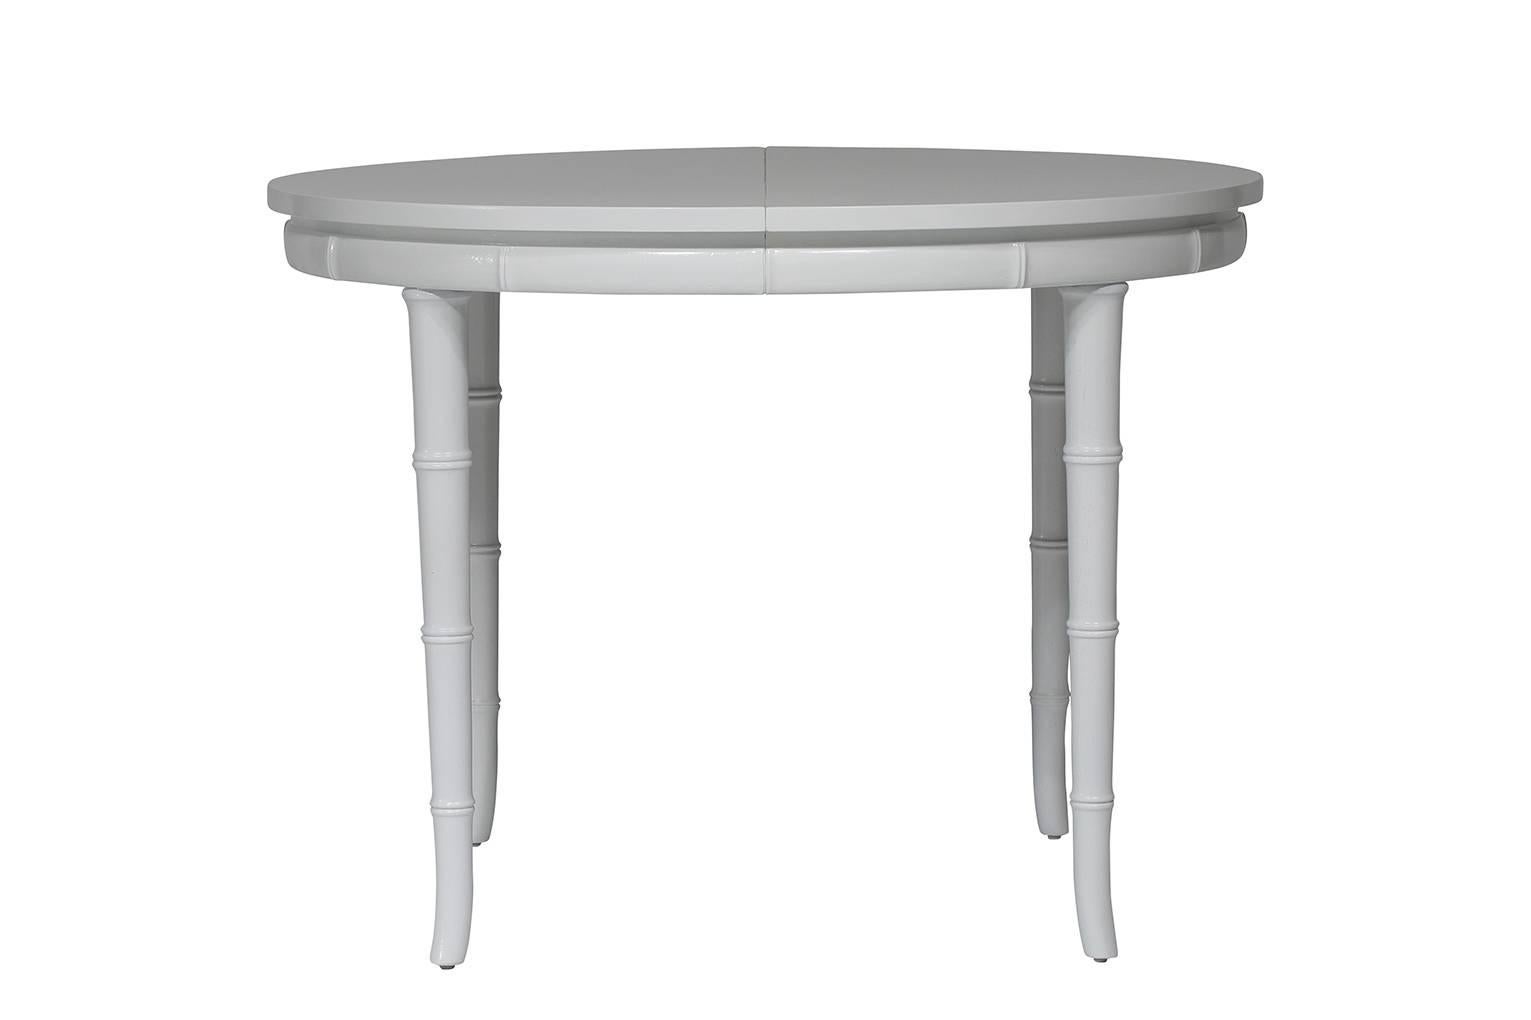 Vintage Henredon faux-bamboo dining table newly lacquered in white. The circle (39.5